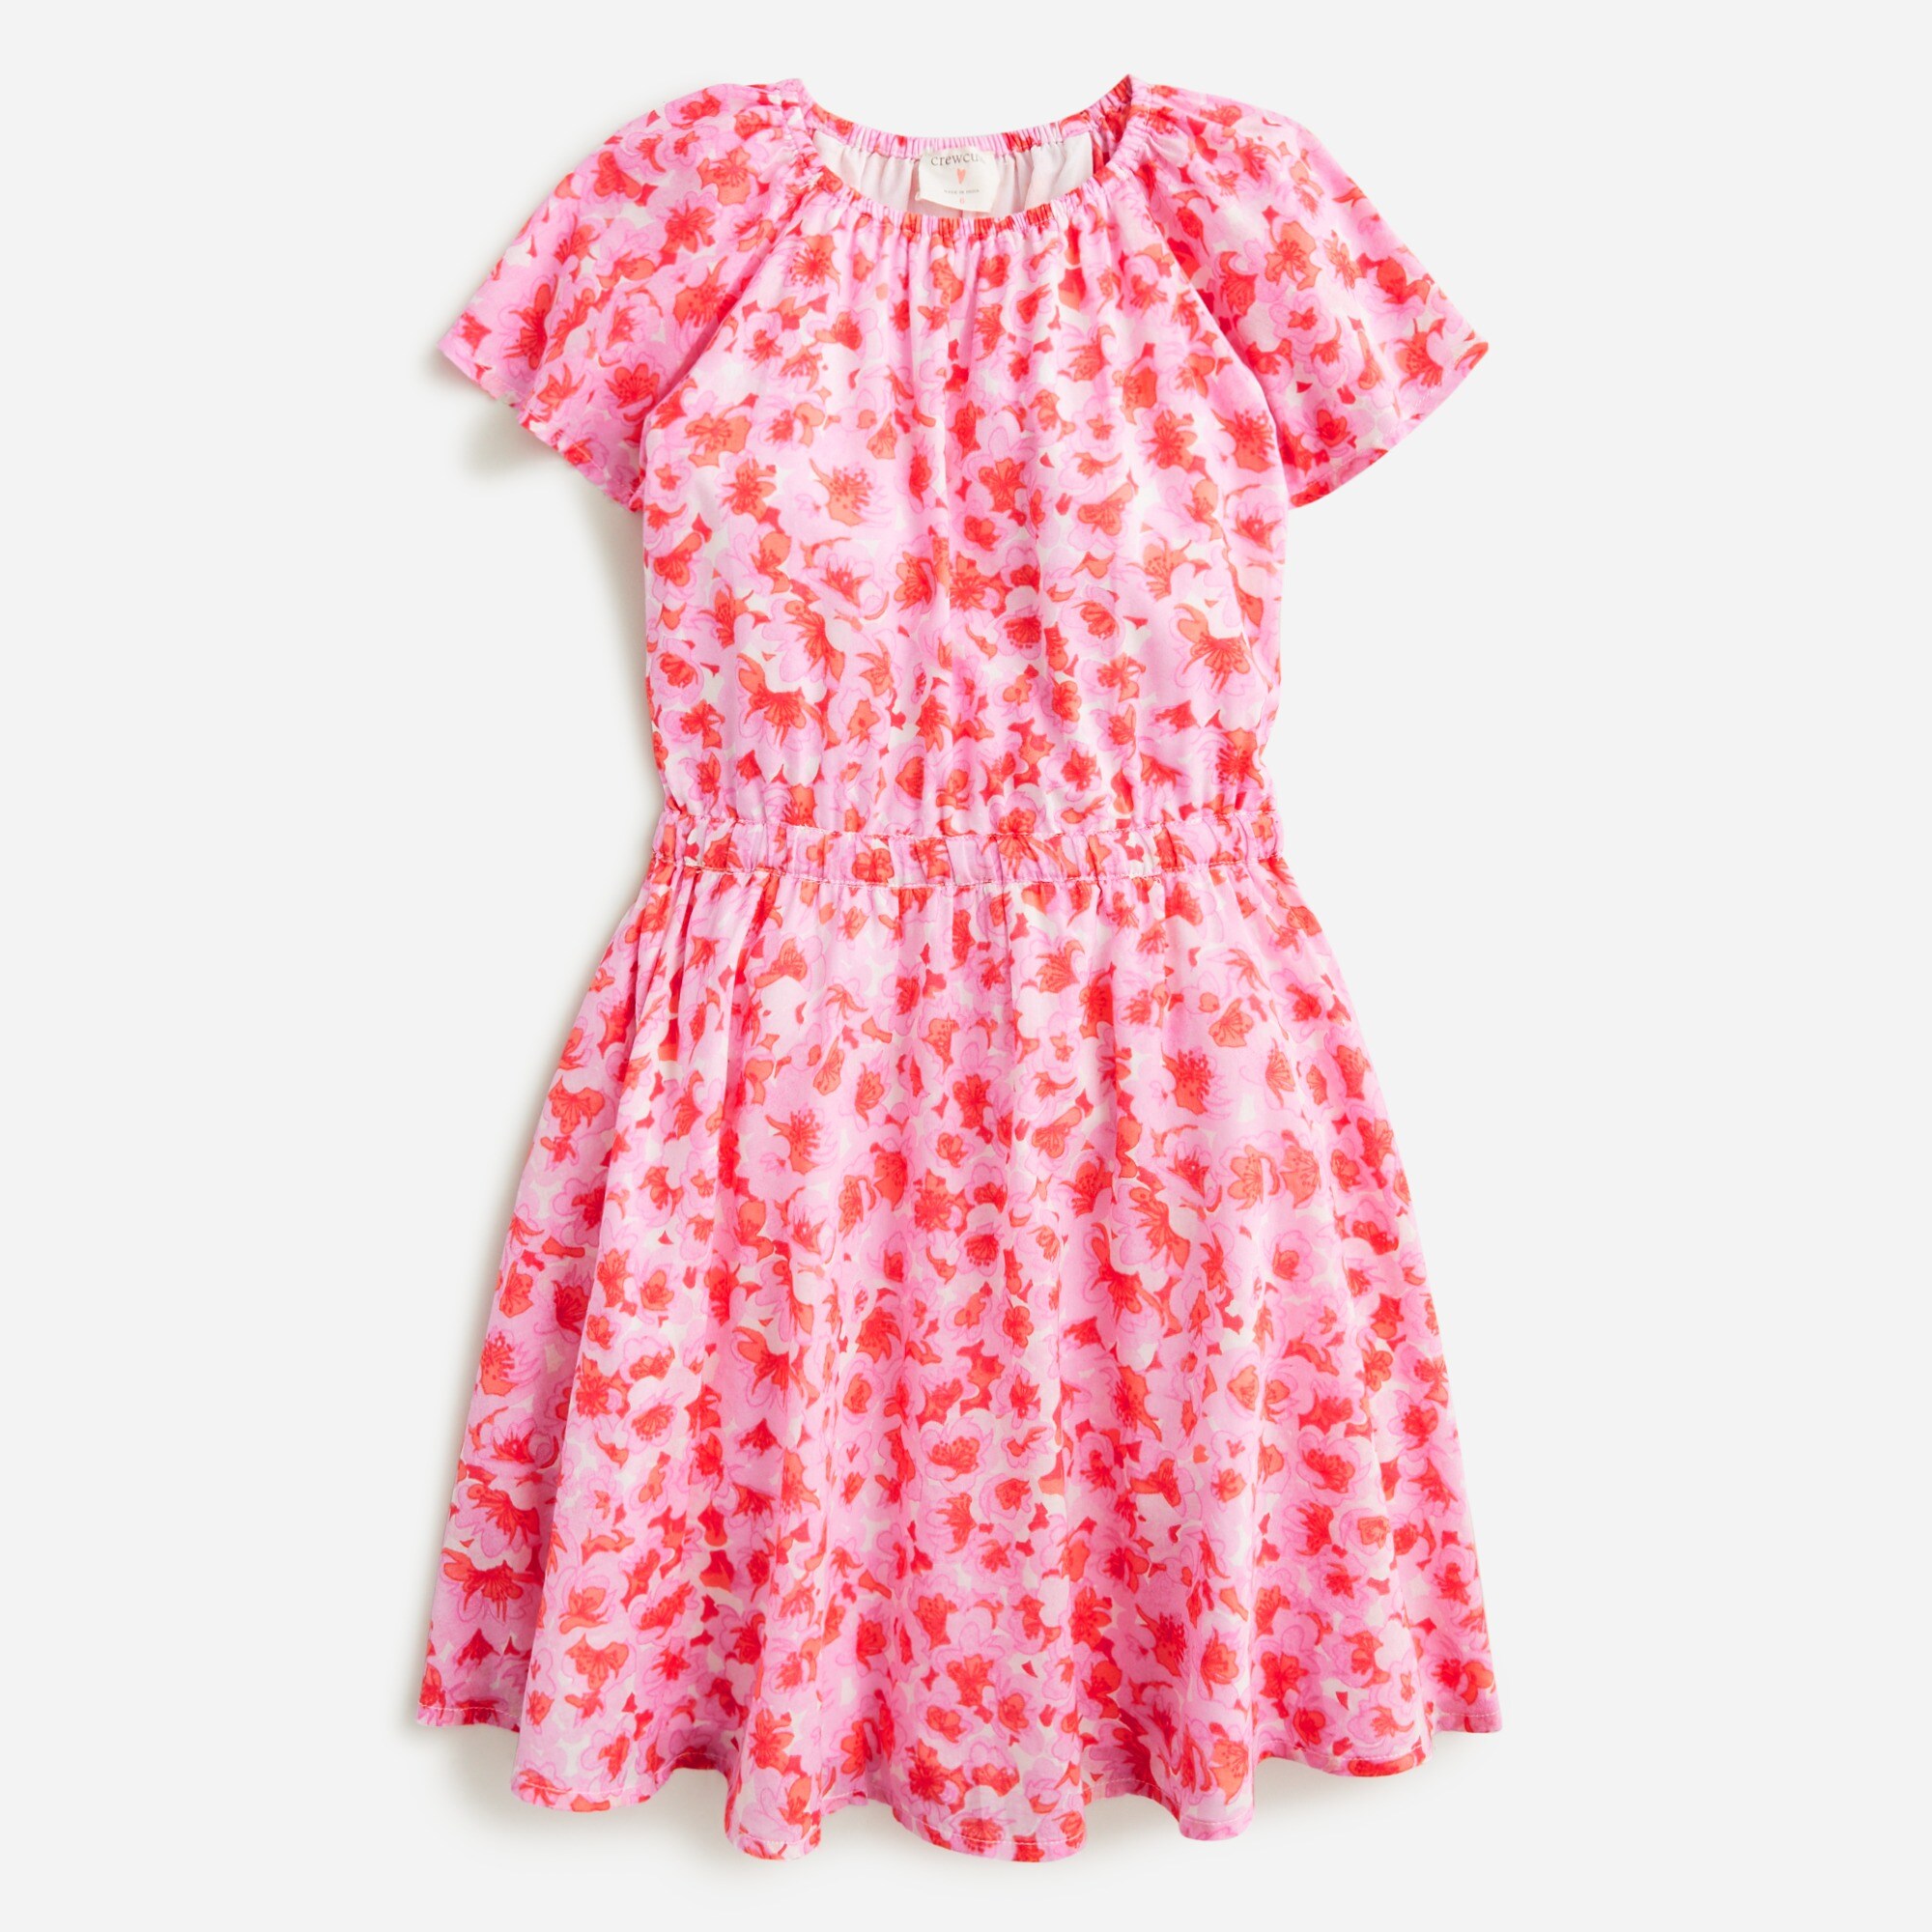  Girls' printed cotton voile dress